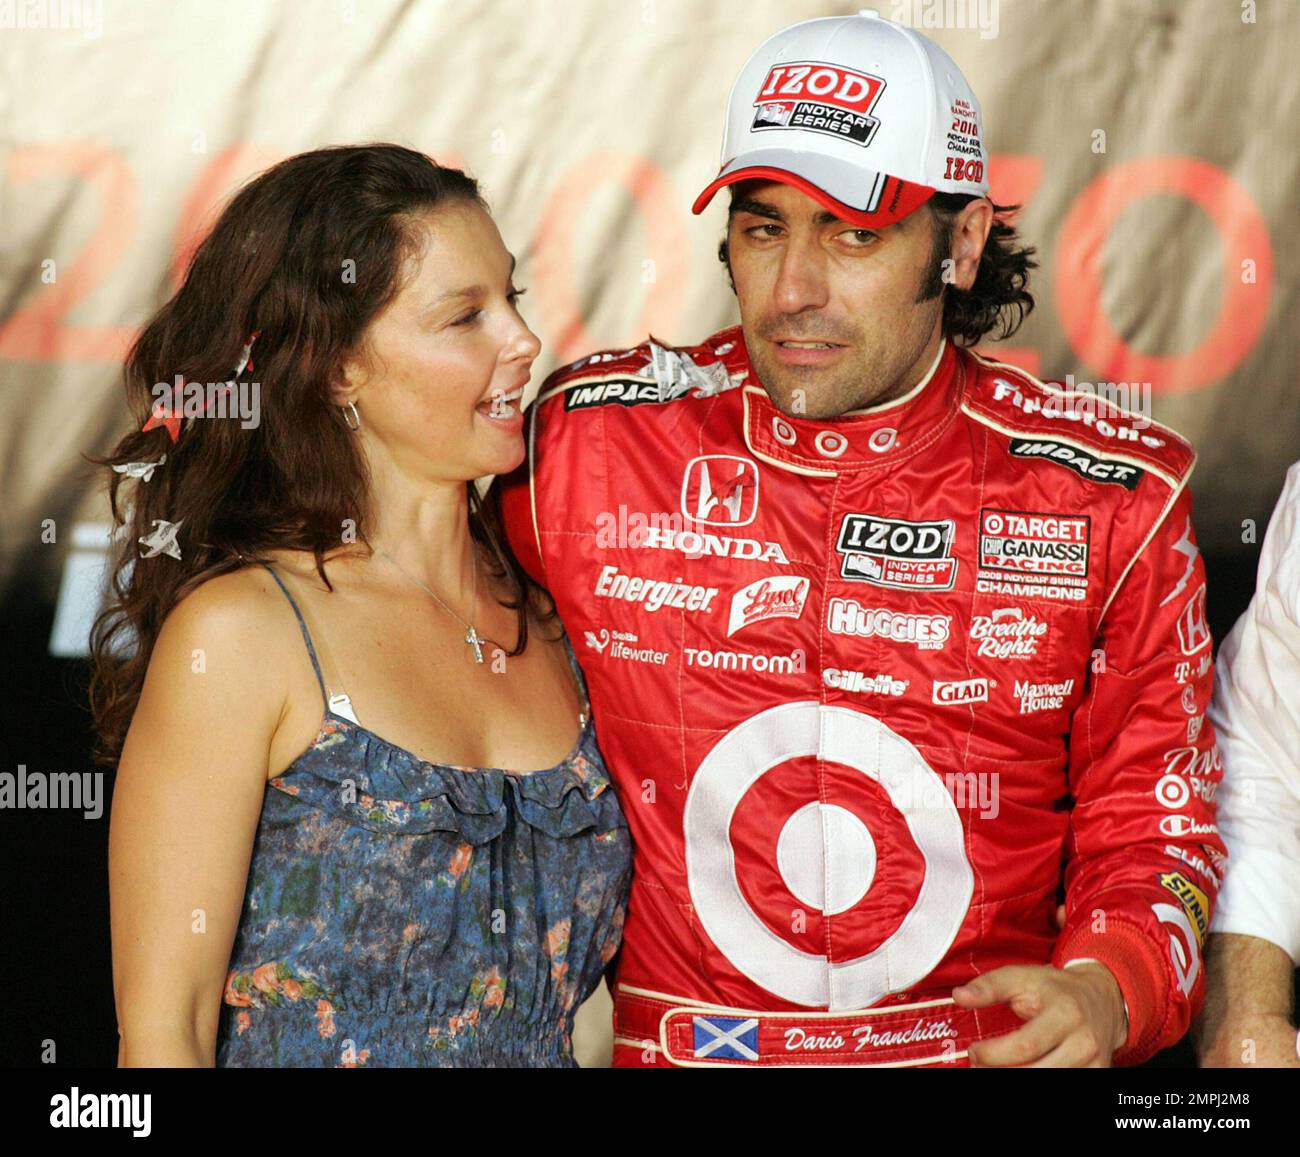 Indy Racing League driver Dario Franchitti and extremely happy looking wife  actress Ashley Judd celebrate his IZOD IndyCar Series Title Championship  after the Cafe do Brasil Indy 300 held at the Homestead 